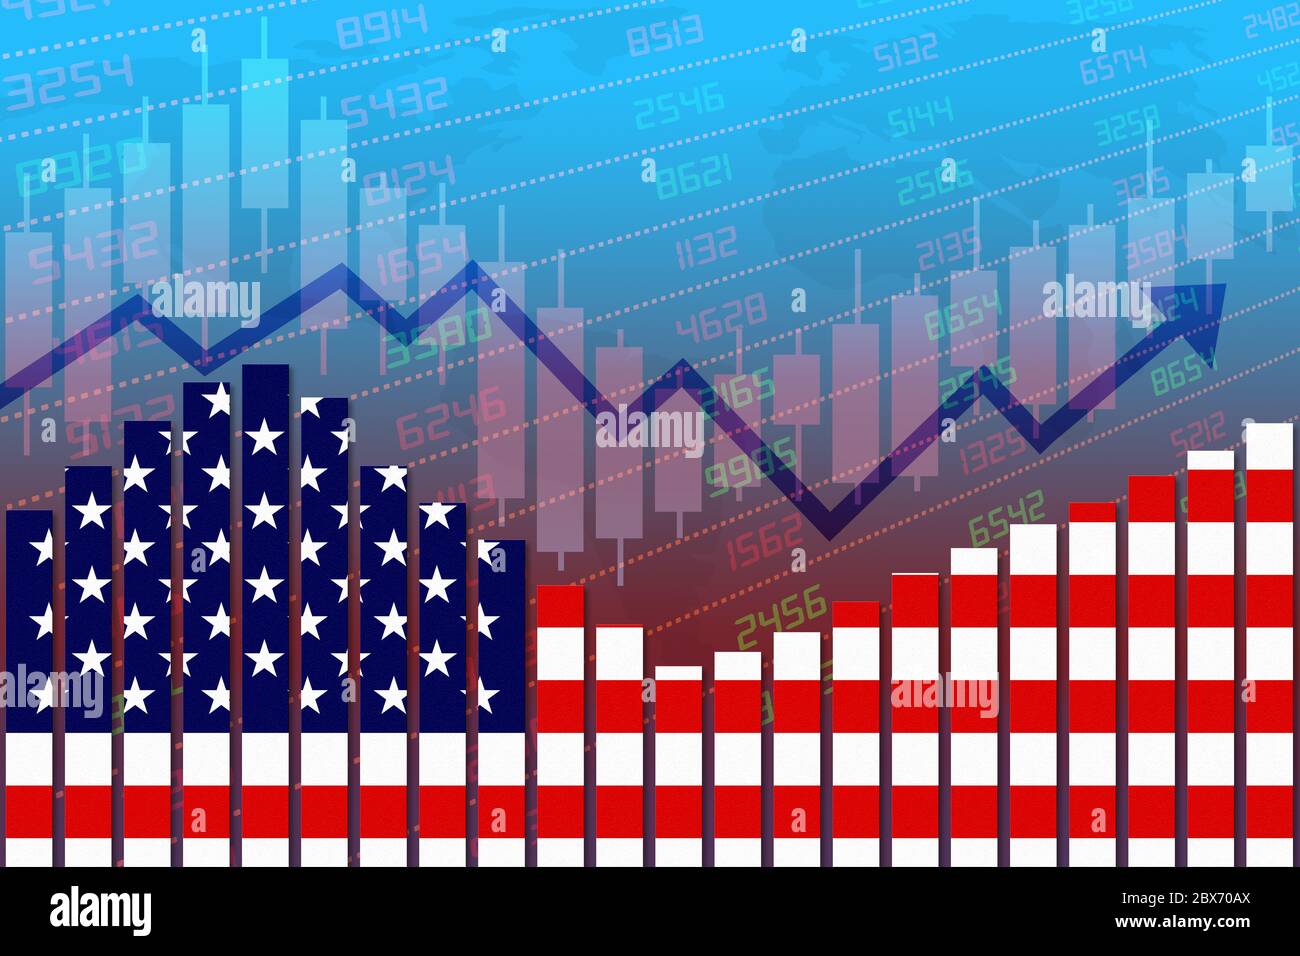 United States flag on bar chart concept of economic recovery with stock market down and up. Concept of business improving after crisis such as Covid-1 Stock Photo